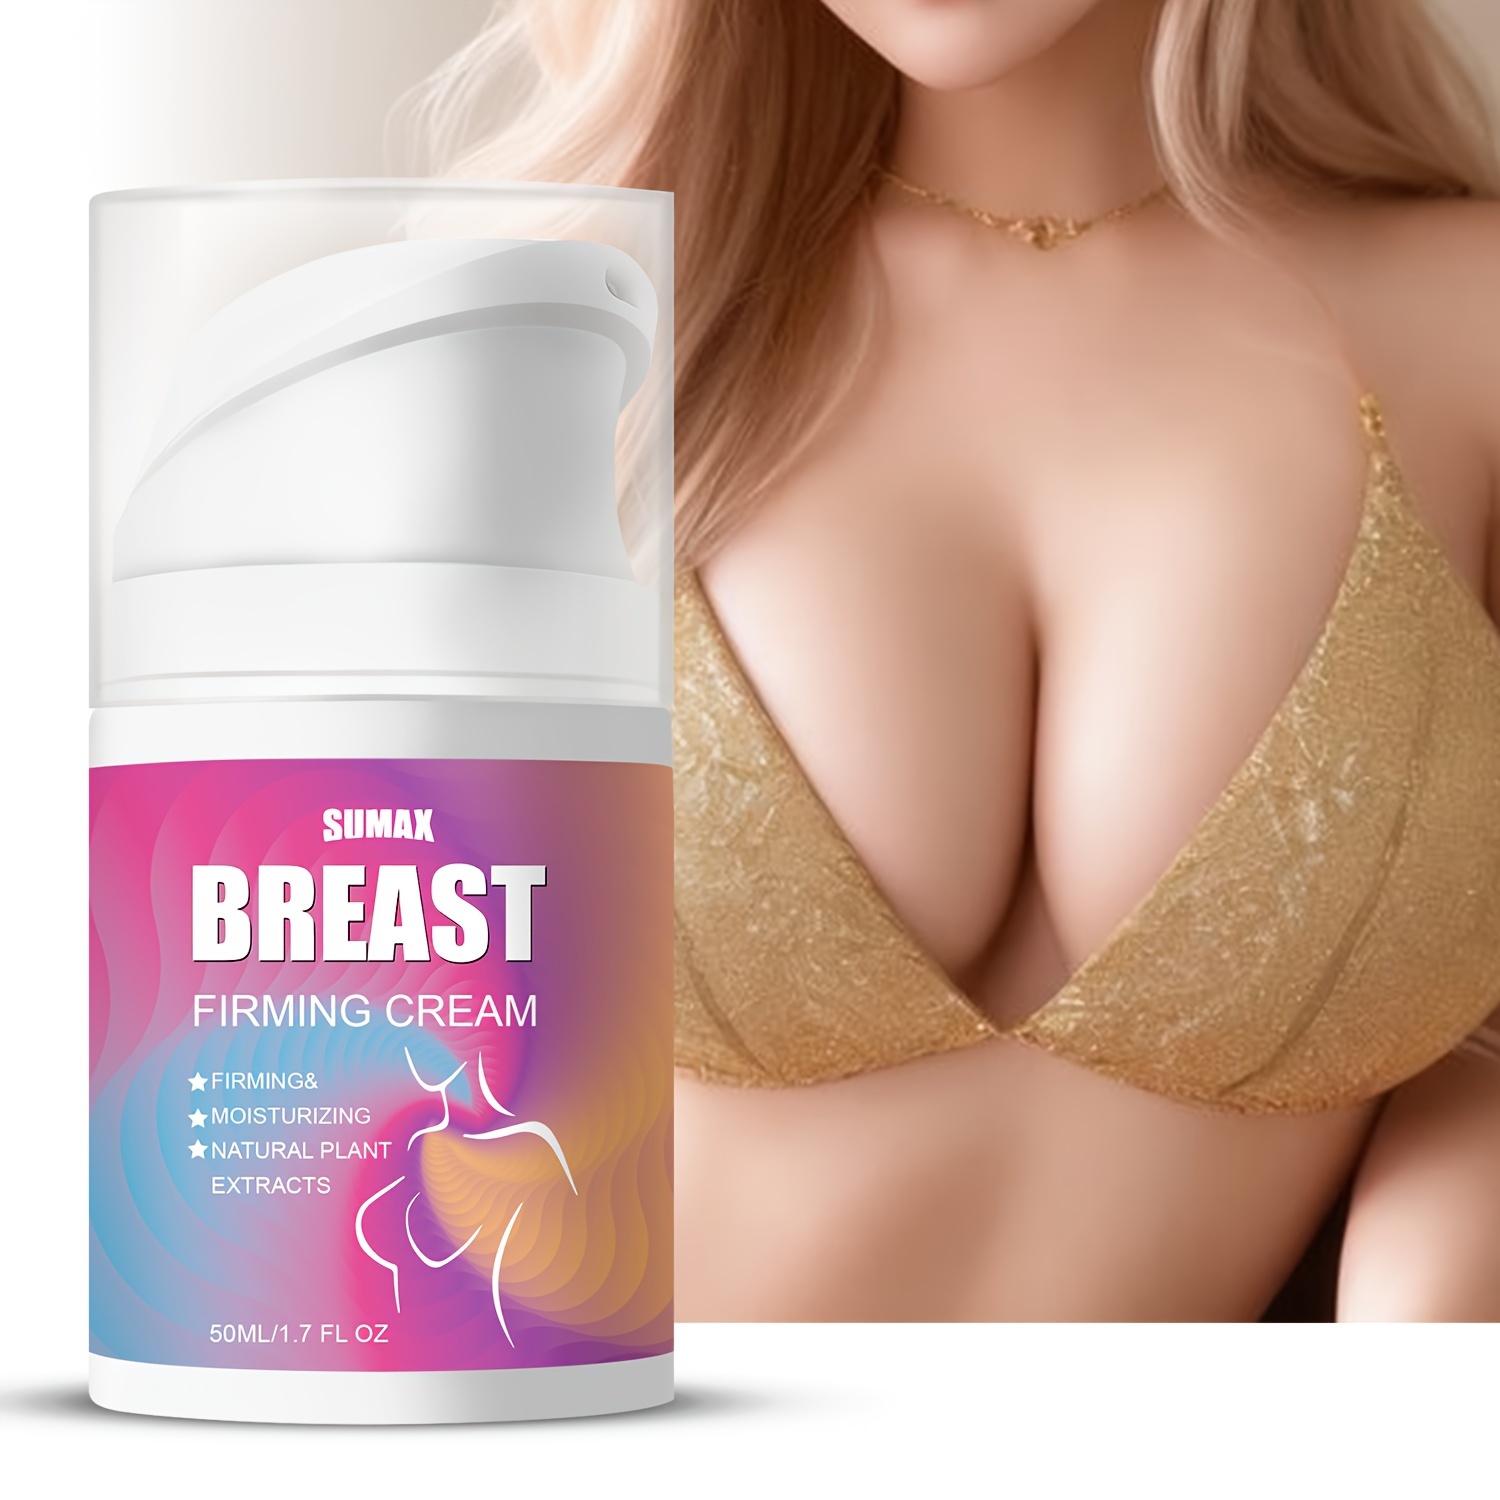 5G/15G/30G/50G/TRSTAY Breast Enhancement Cream Uses Our Special Body Cream  To Make The Breasts And Buttocks Tighter And Fuller